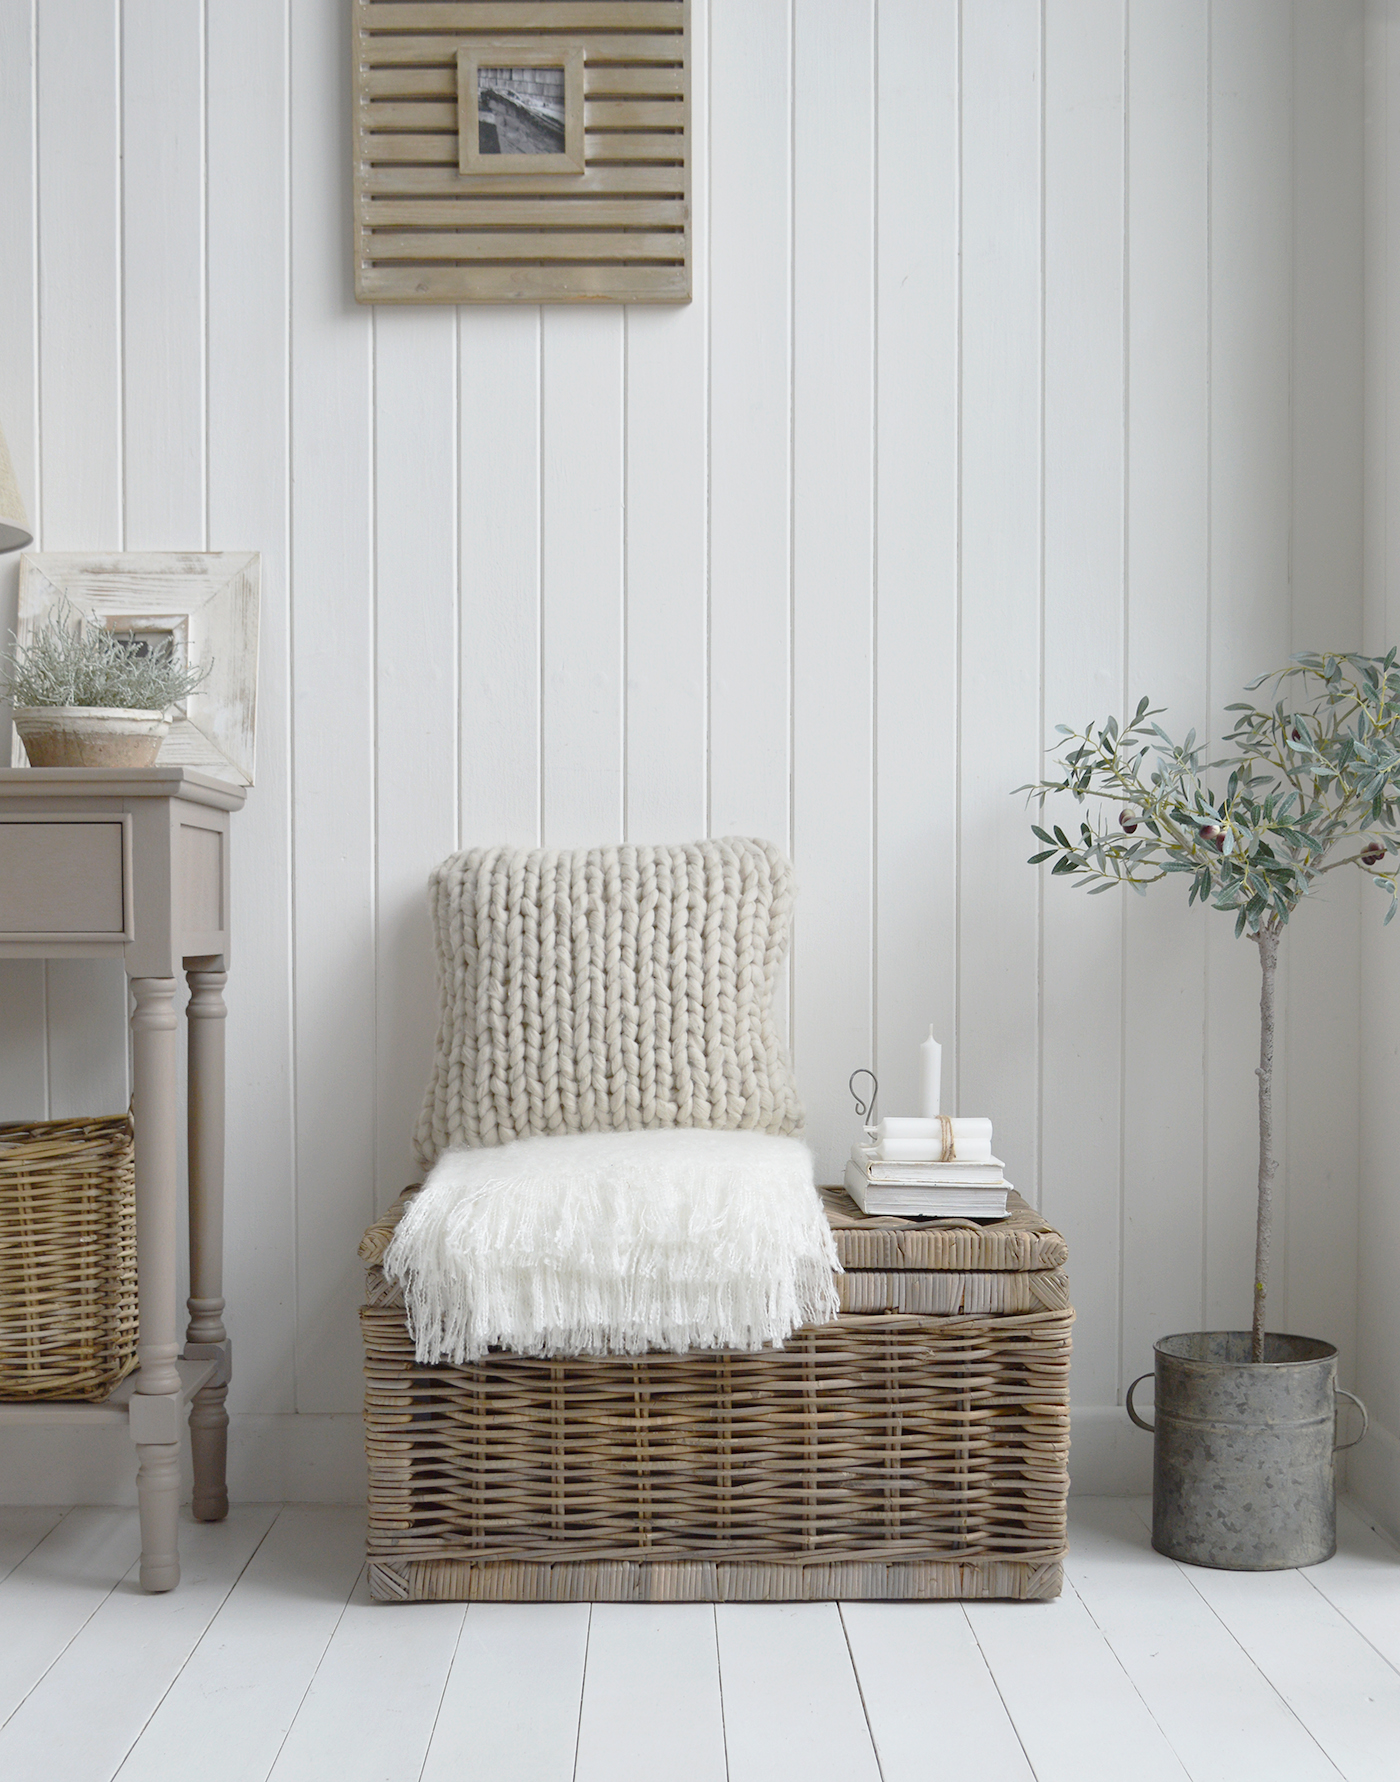 The Seaside small basket, a perfect little side table to fill a space as in a beachhouse styled home